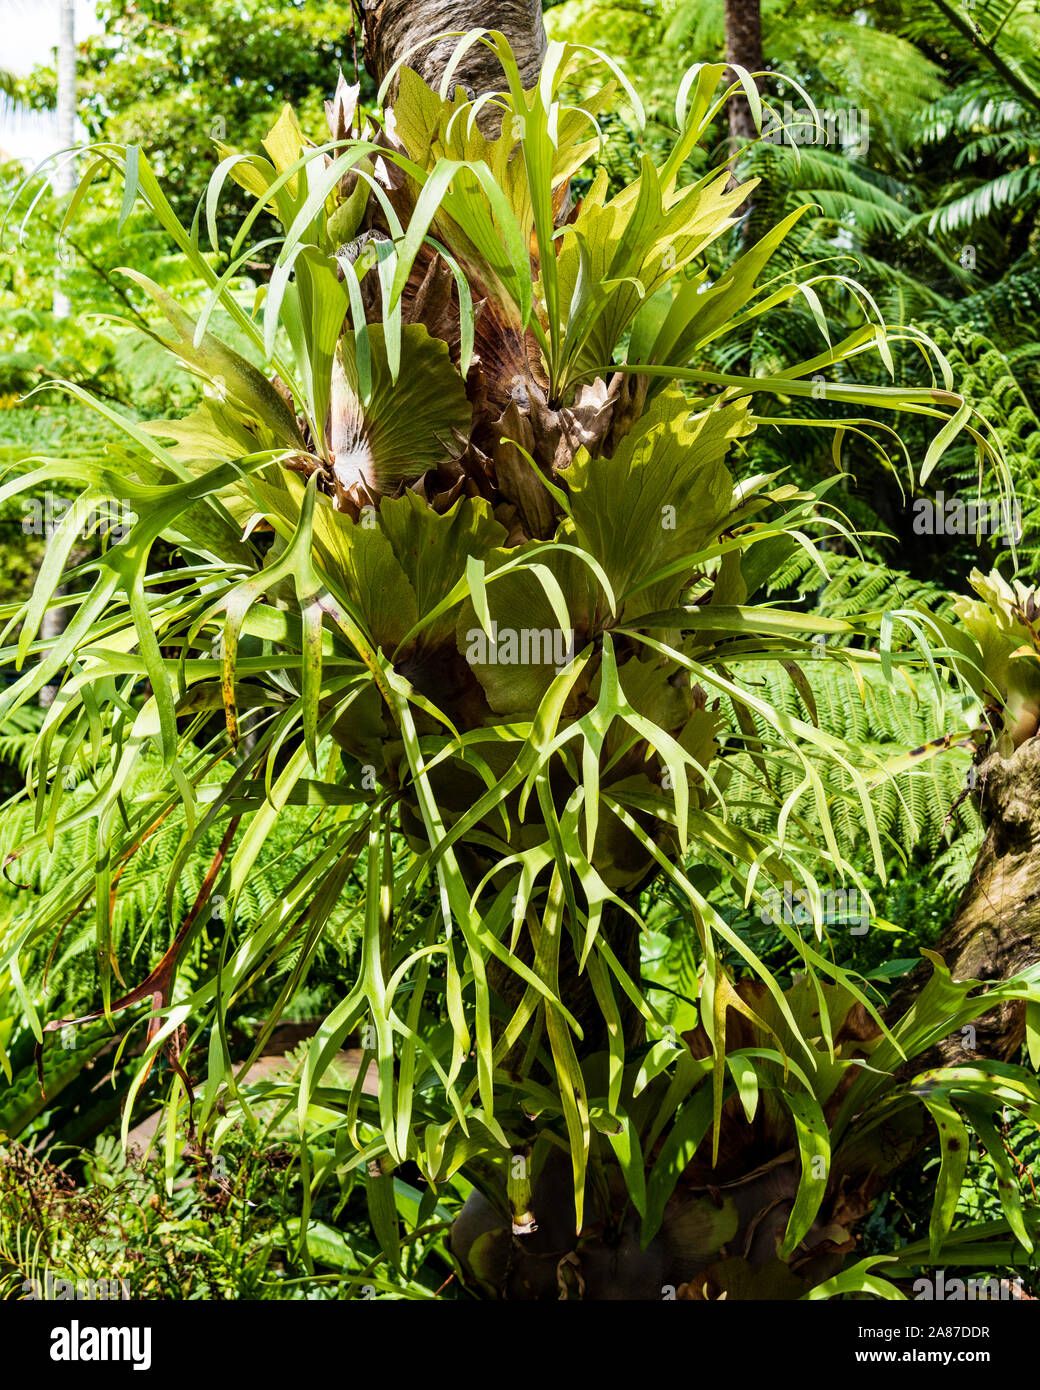 A Stag Horn Fern growing on the side of a tree Stock Photo